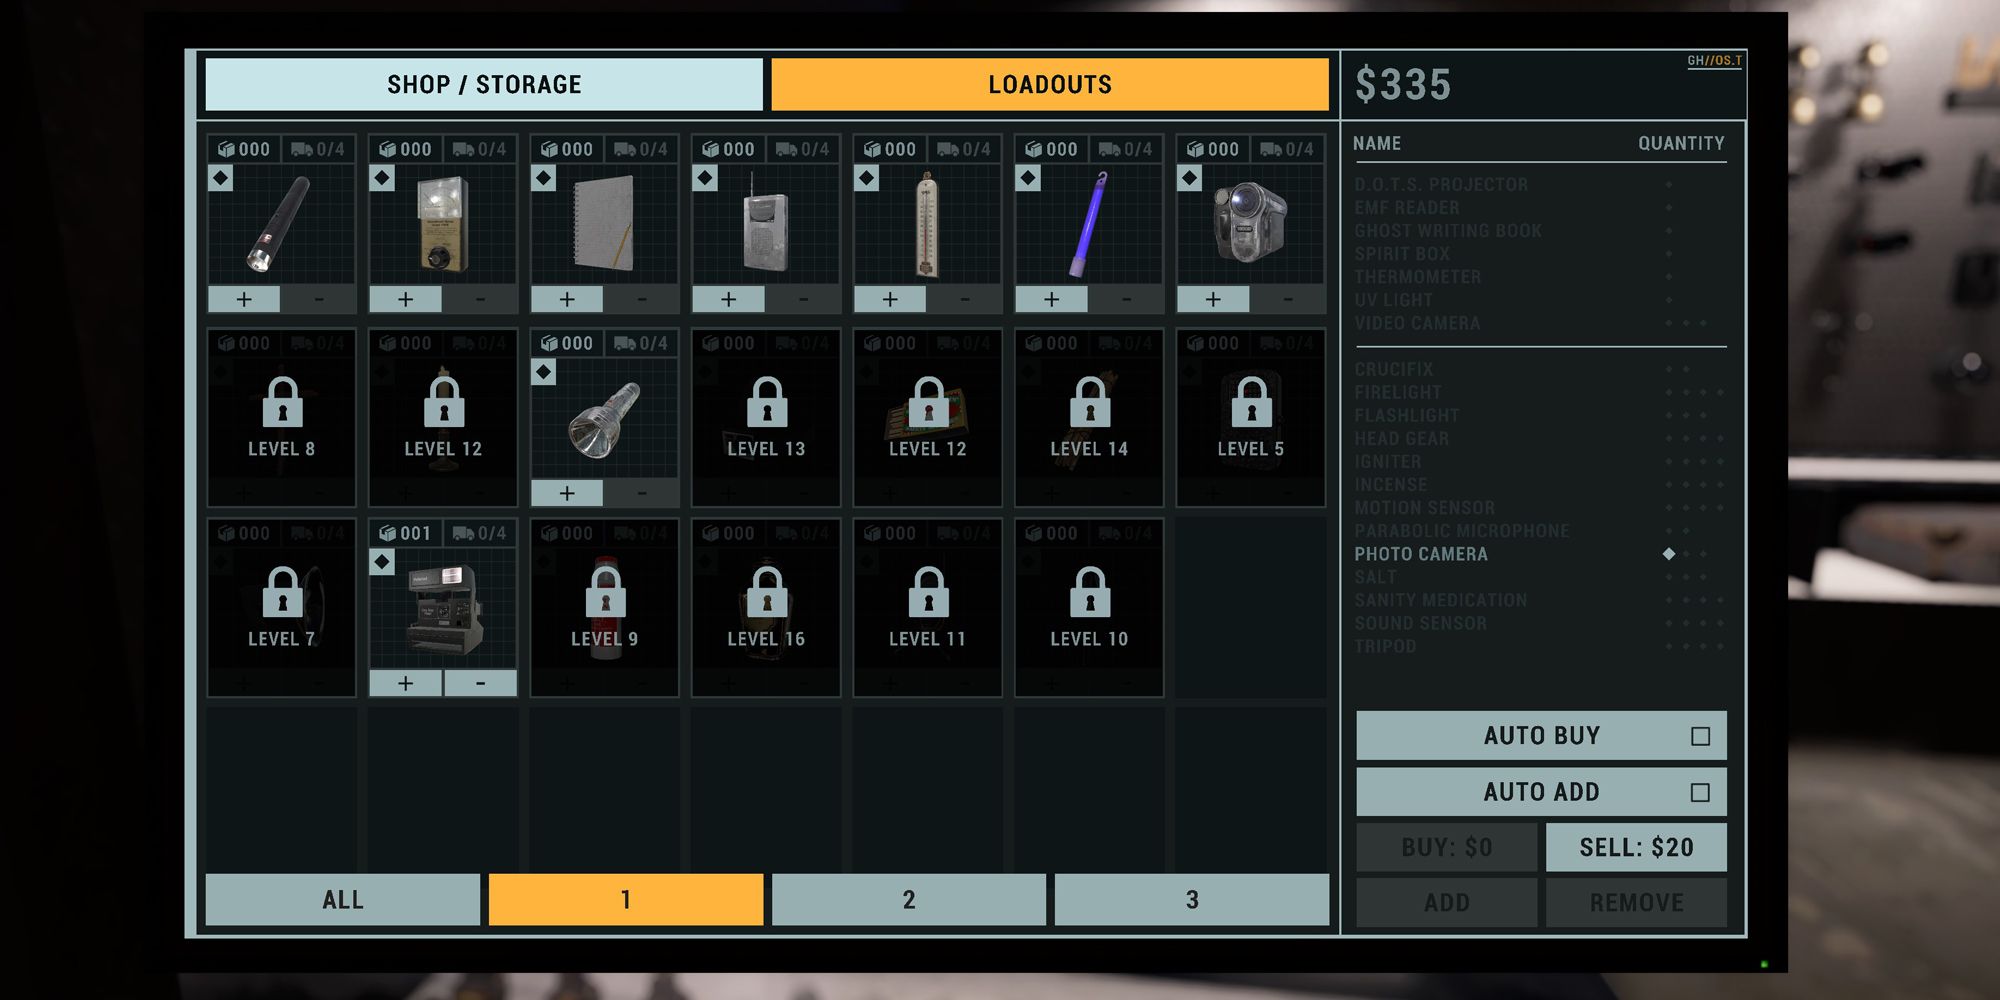 Phasmophobia Equipment Store displaying all items available for purchase and what level you must be to unlock them